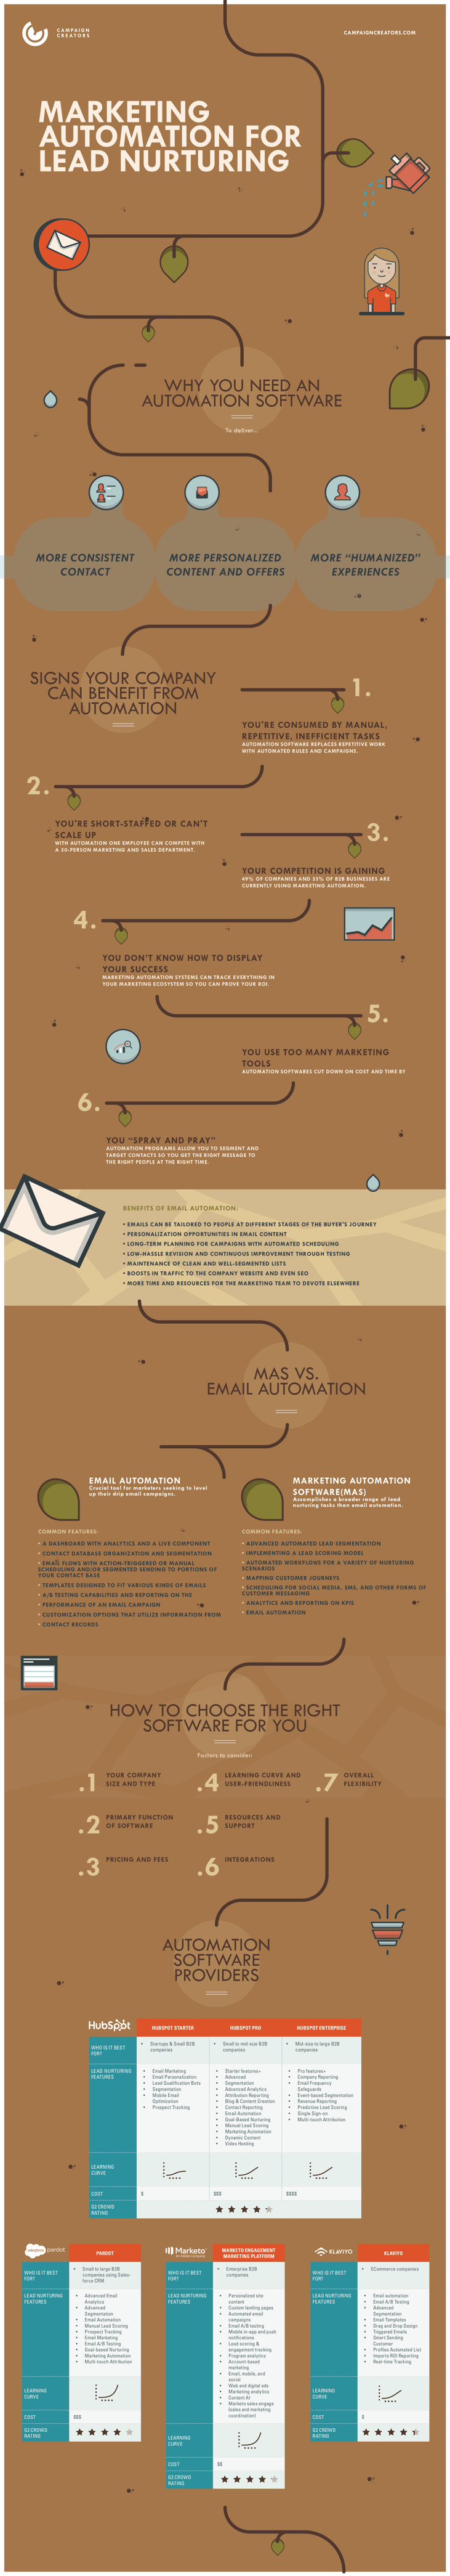 CC - Marketing Automation for Lead Nurturing - Lesson 3 Infographic